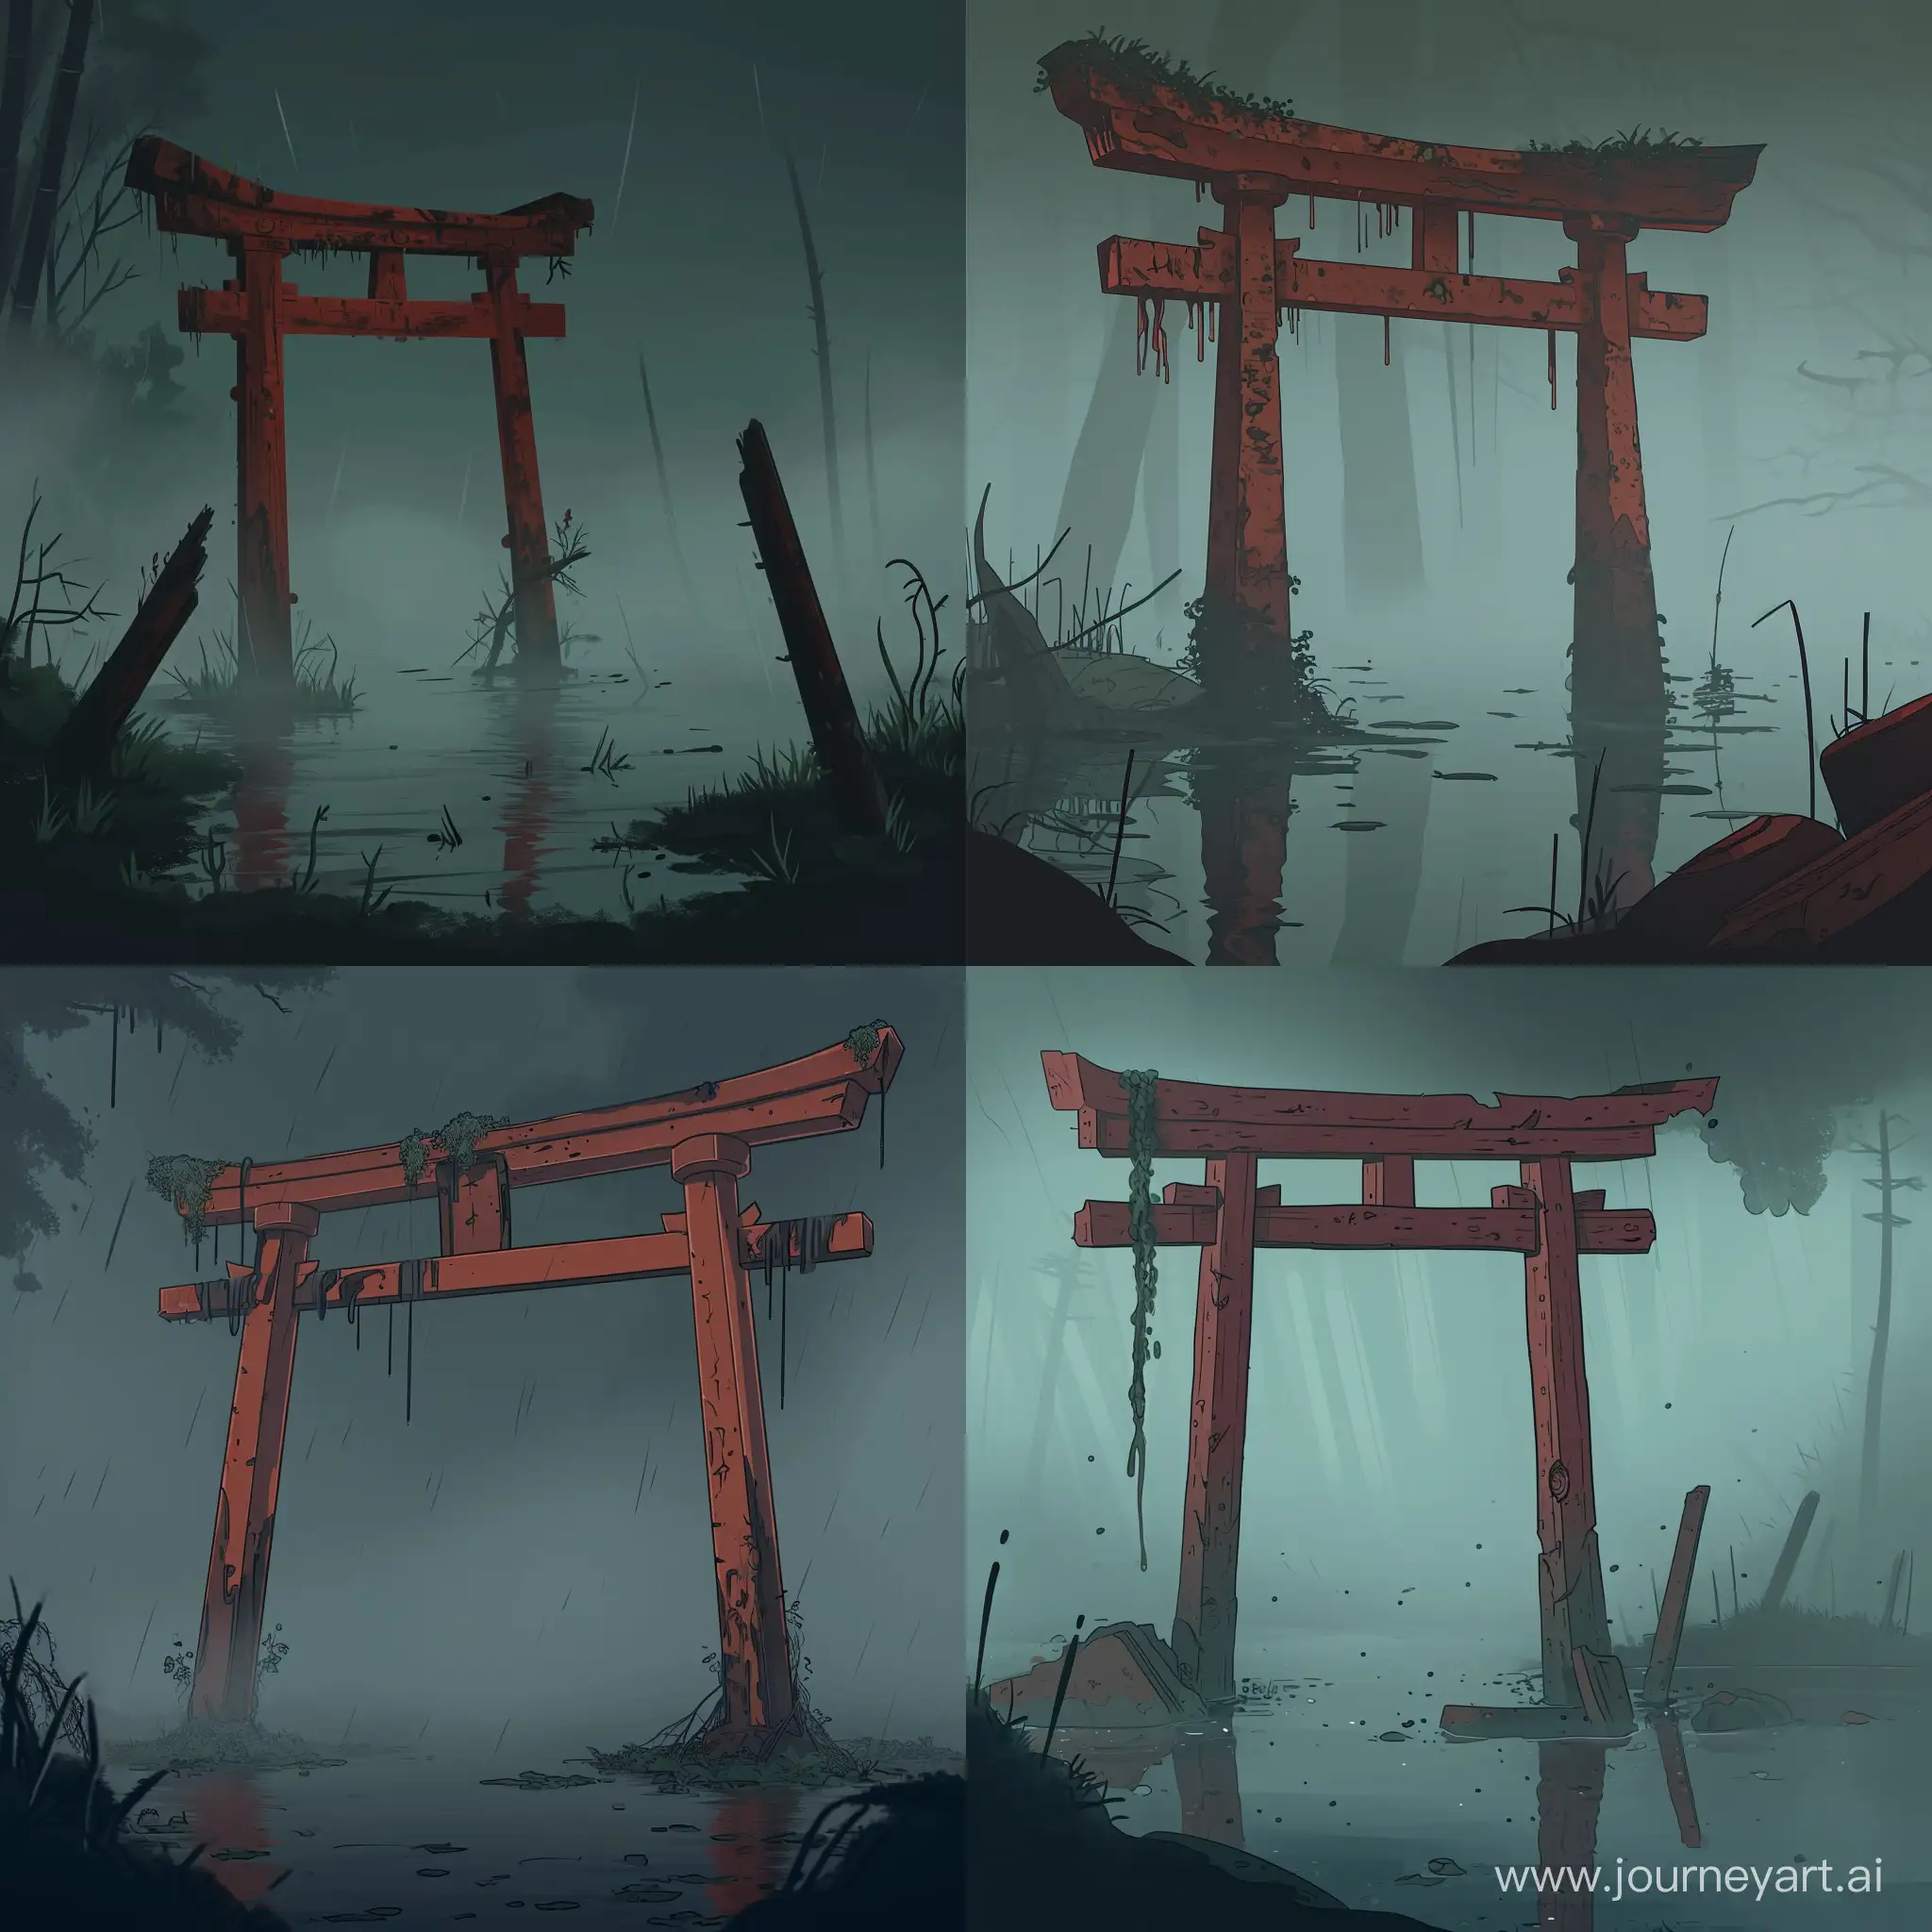 An old, rotting, leaning red torii gate standing in a dimly lit, foggy, eerie lake, set in foggy dark lake, japan tradition taste creepy world, in cartoon style